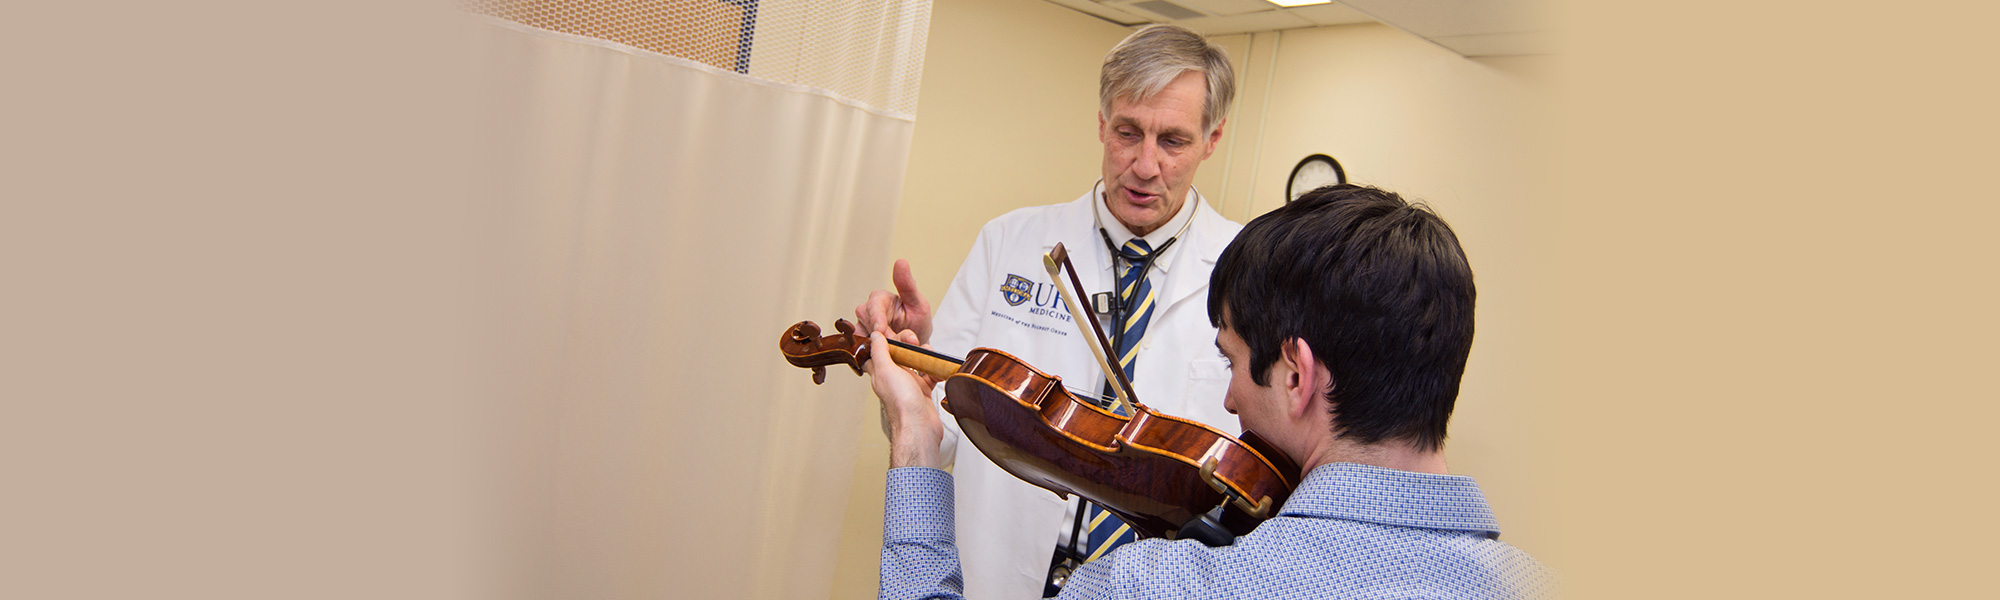 Patient Playing Violin for a Doctor